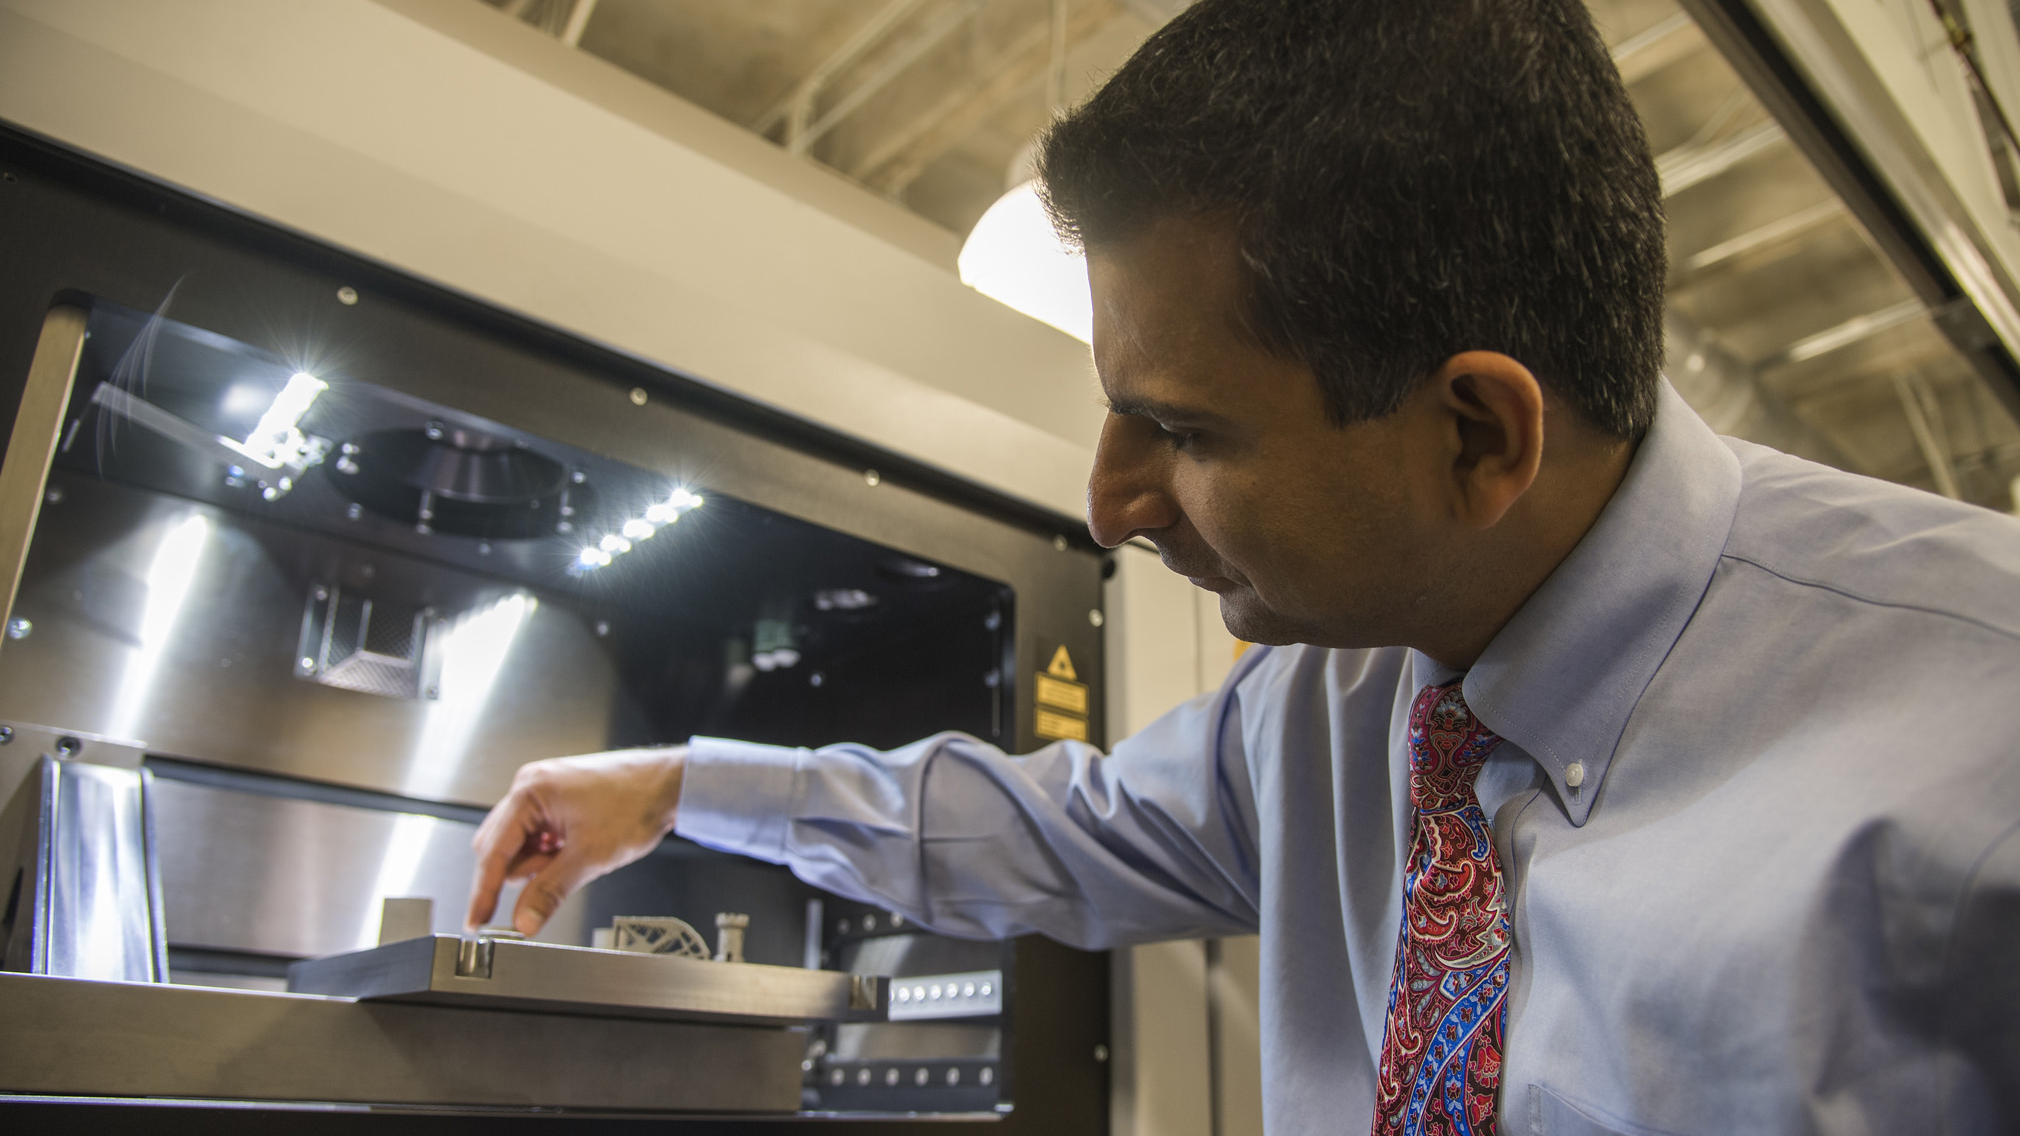 Nima Shamsaei, director of Auburn's National Center for Additive Manufacturing Excellence, oversees 3-D printing in the lab.